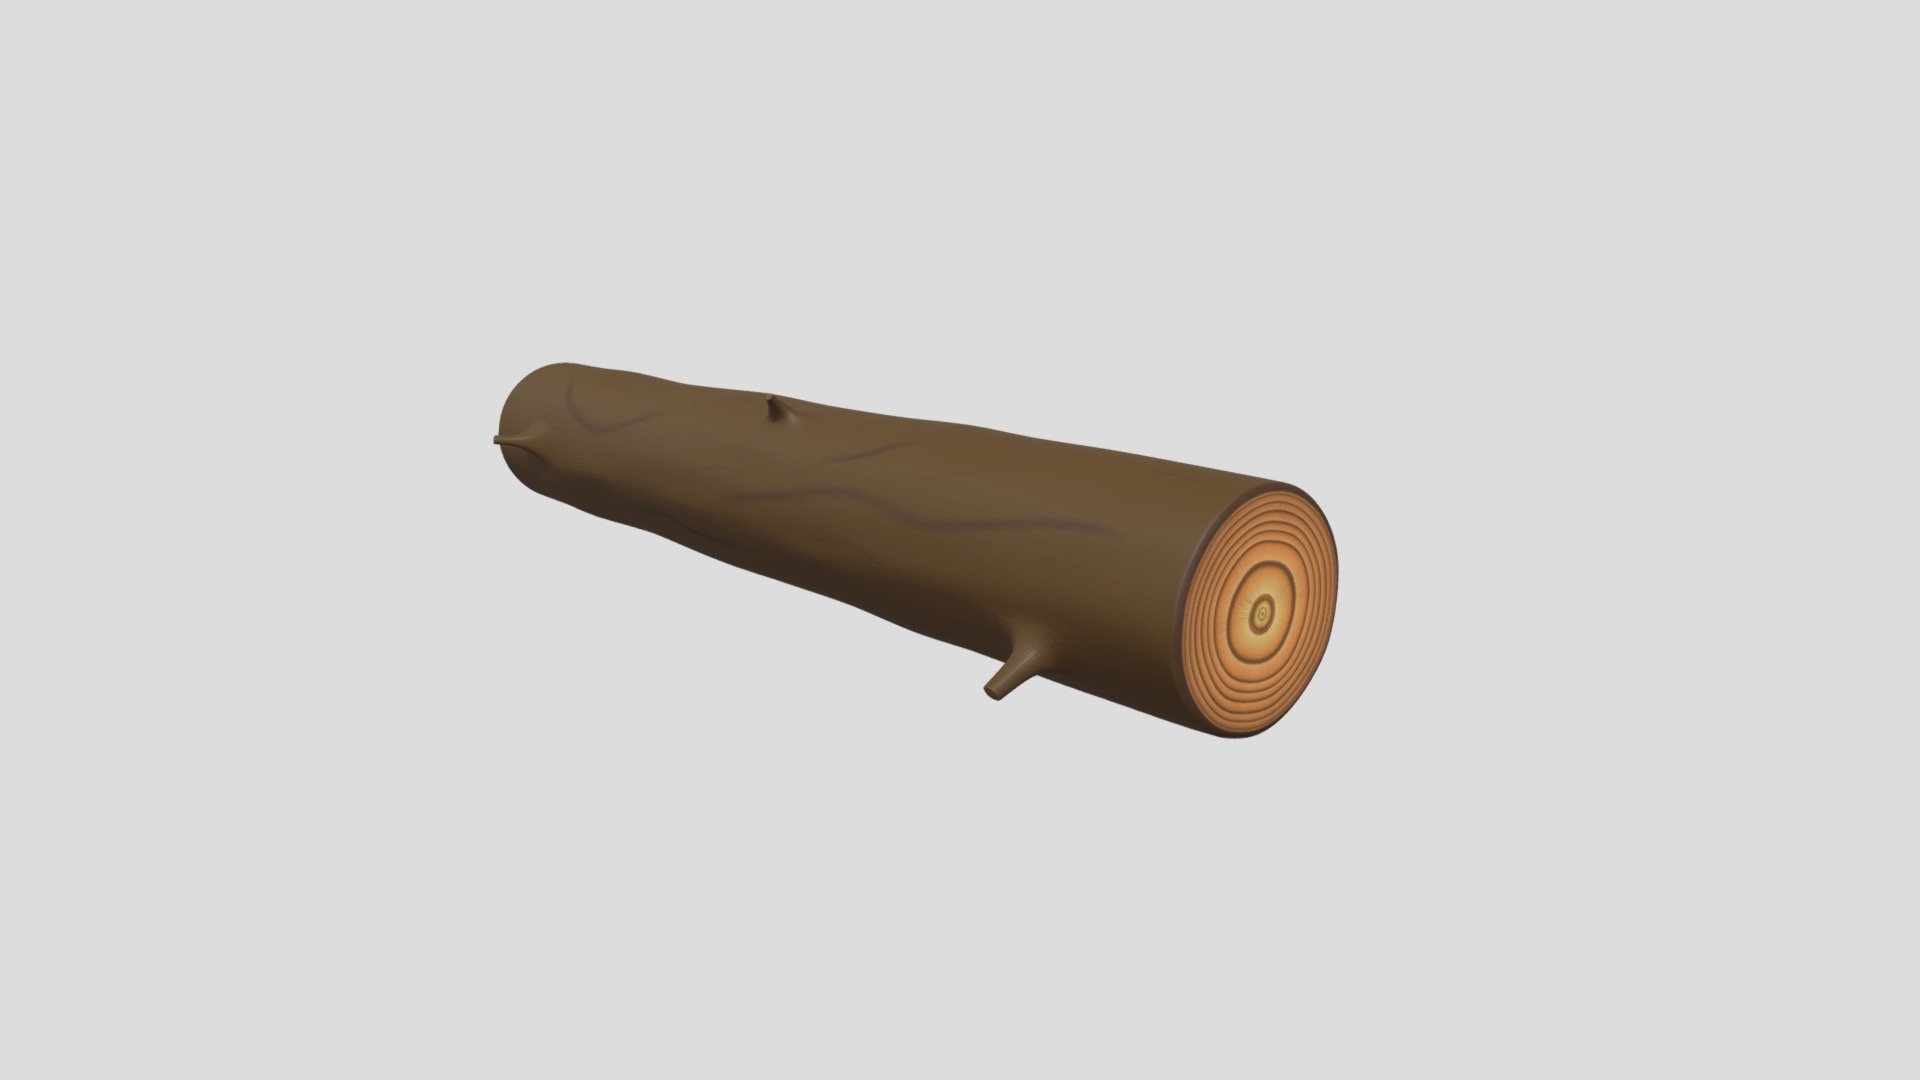 A Simple Log with one Shape.

Subdivision: 2

Materials: 1

Texture: 1024 x 1024

Shapes:
Short

I hope you enjoy the model 3d model